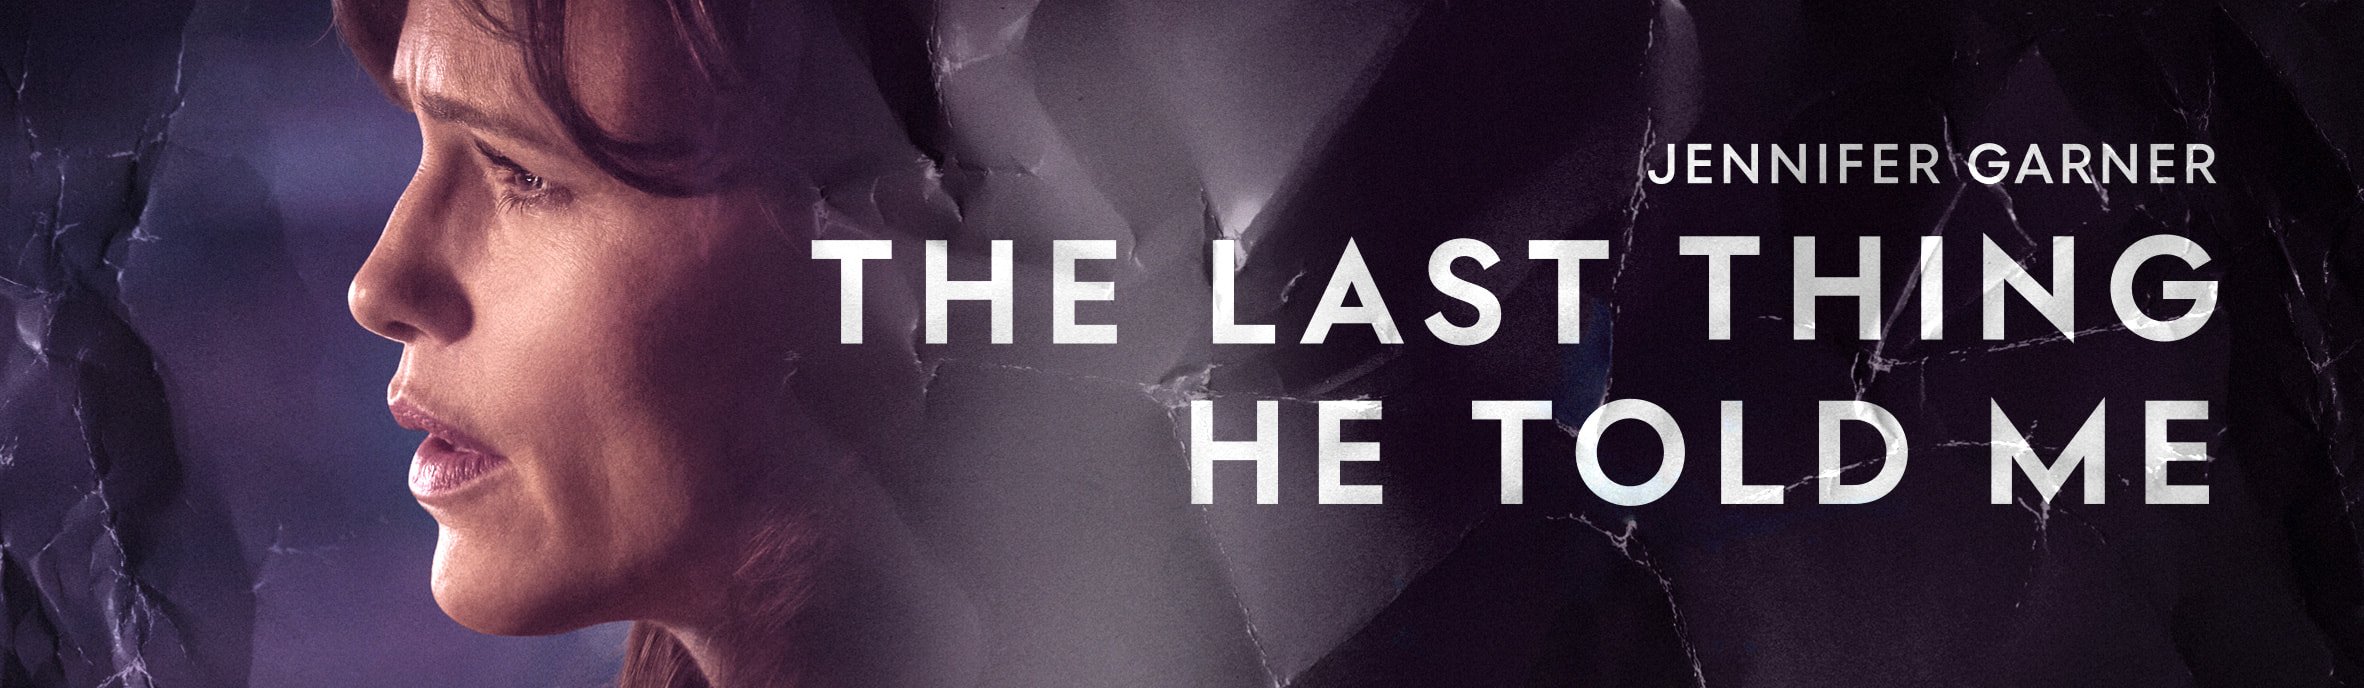 The Last Thing He Told Me - Rotten Tomatoes